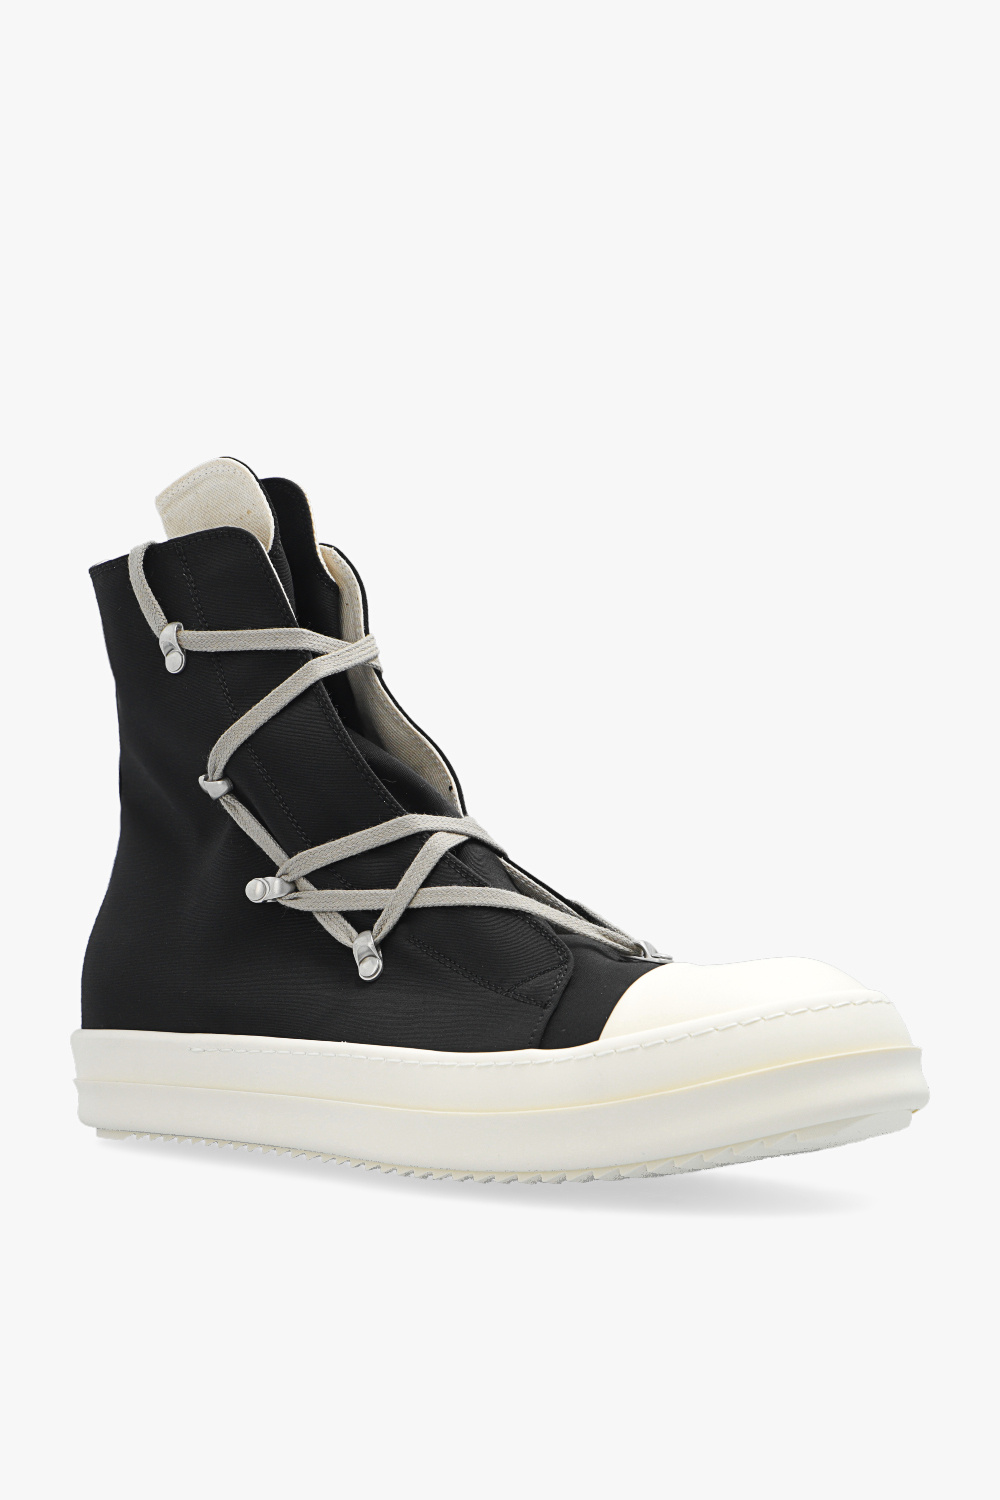 Boots with zip Rick Owens DRKSHDW - Vitkac France